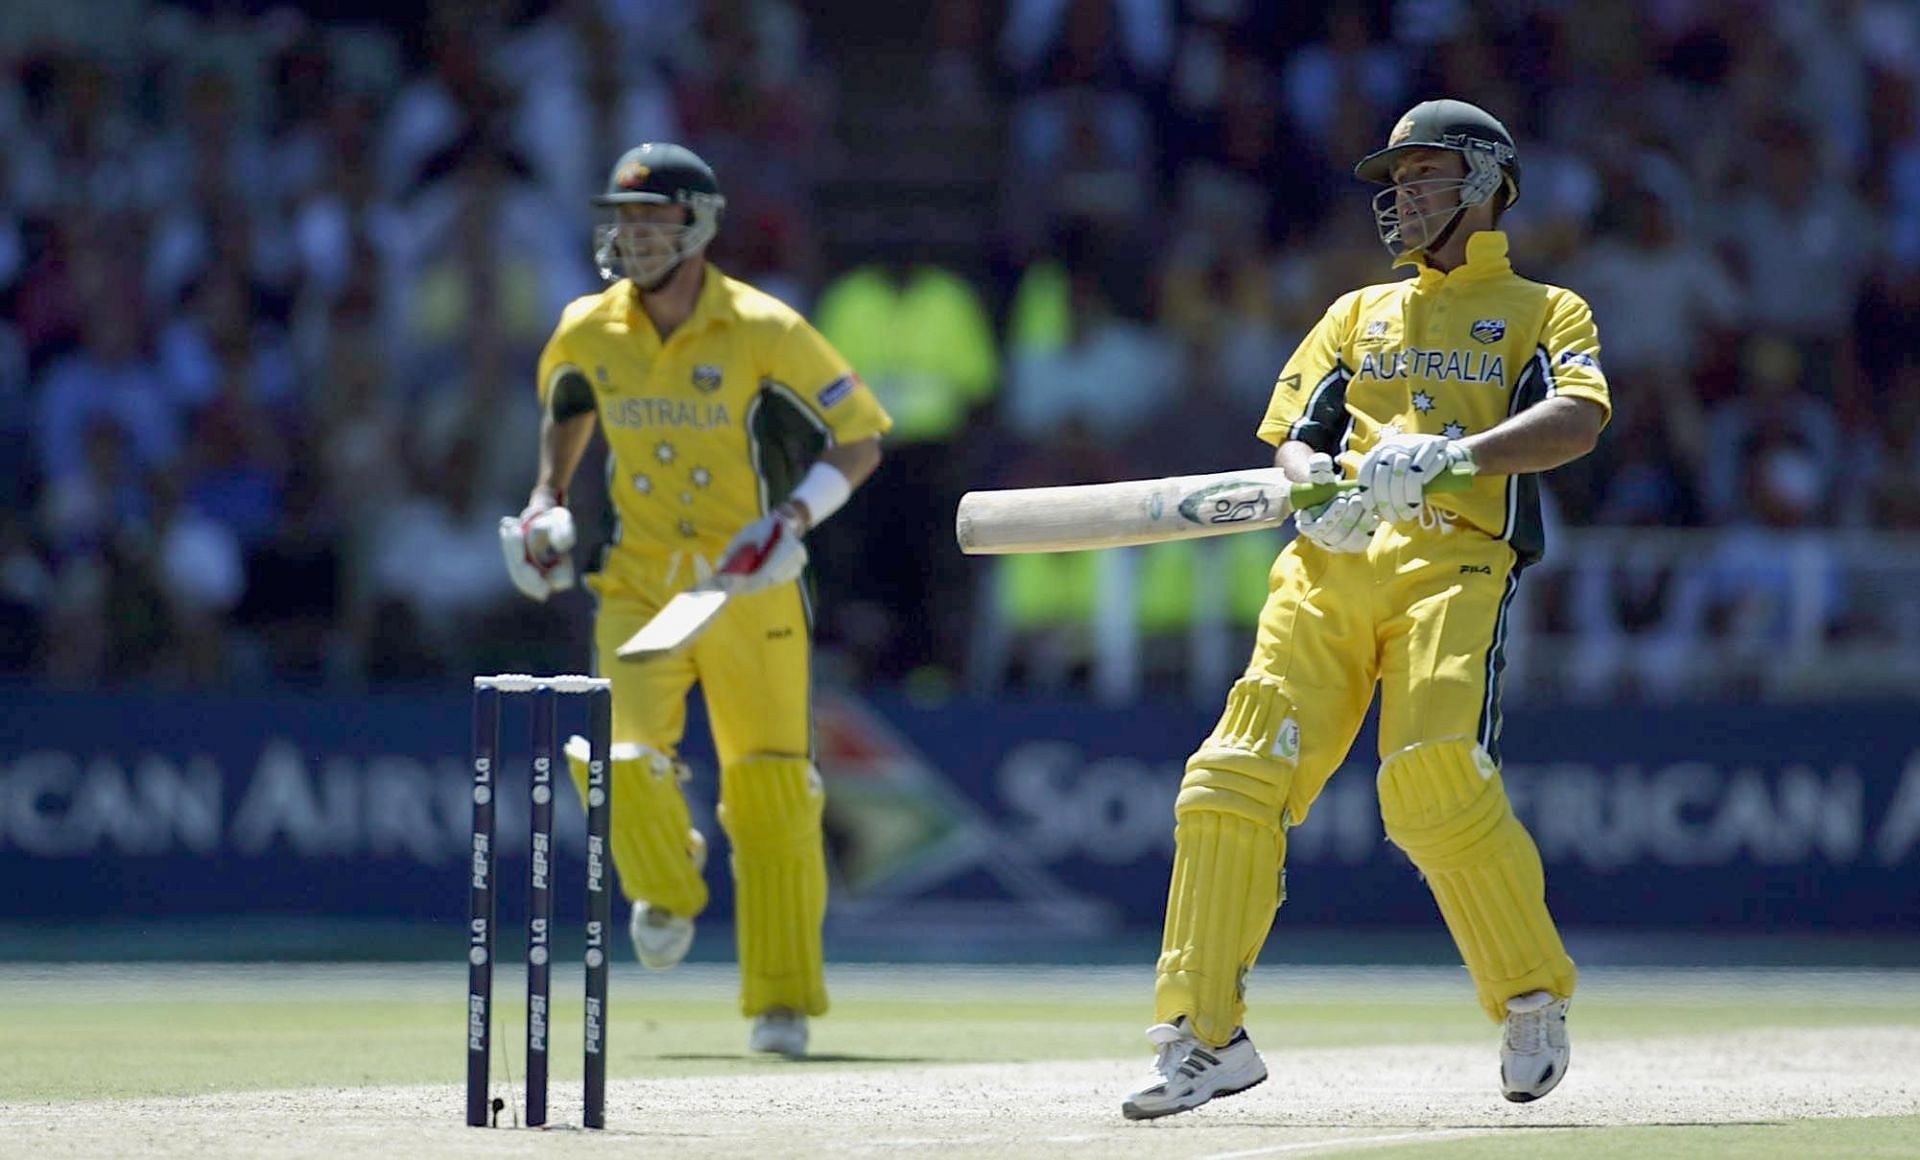 Ricky Ponting of Australia in action